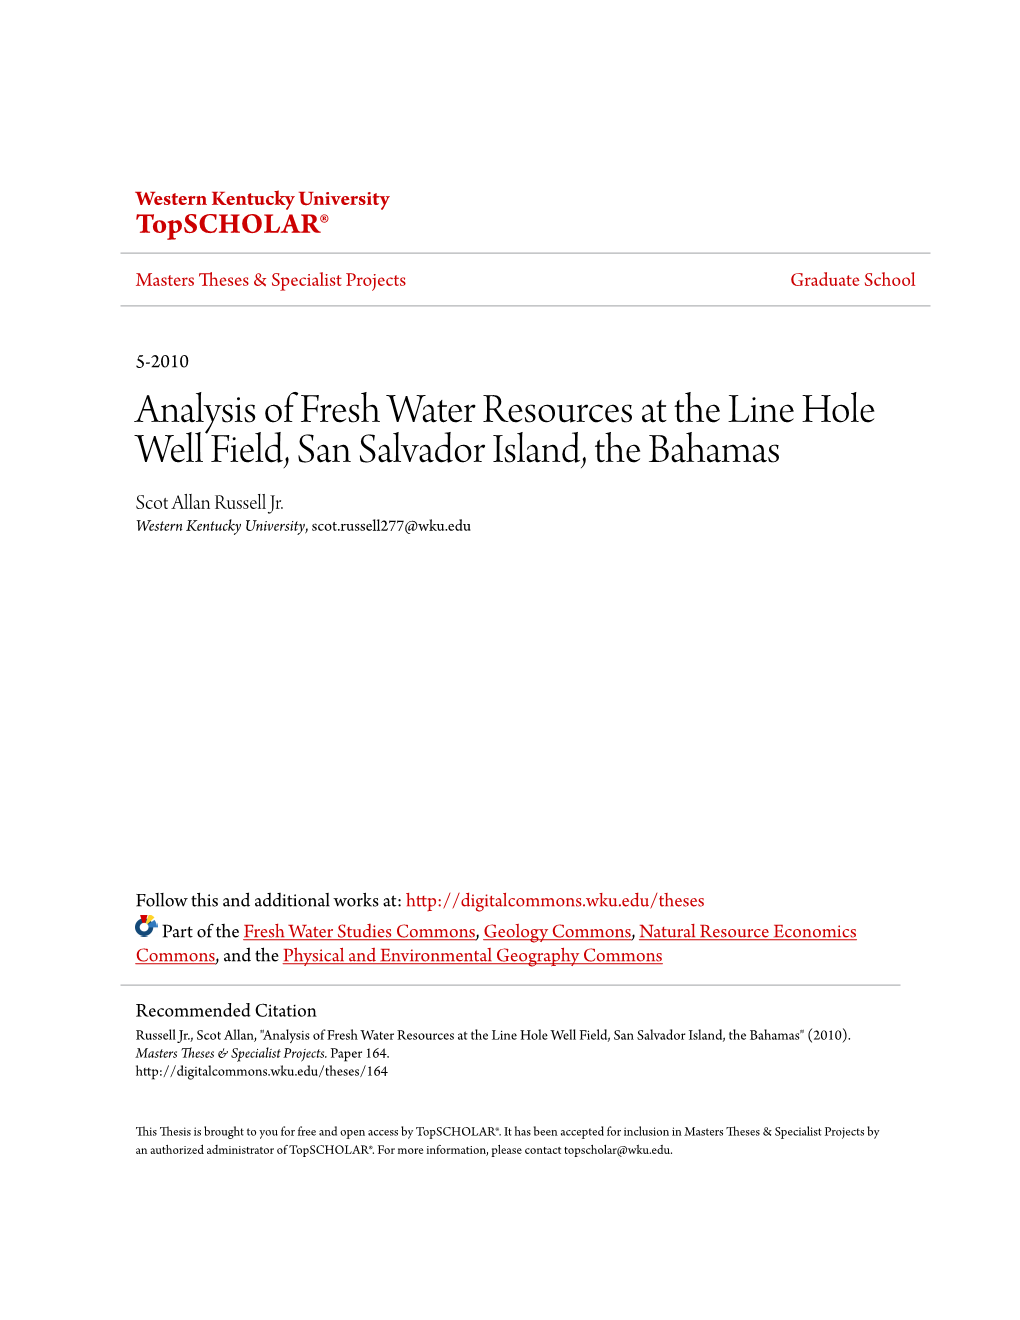 Analysis of Fresh Water Resources at the Line Hole Well Field, San Salvador Island, the Bahamas Scot Allan Russell Jr